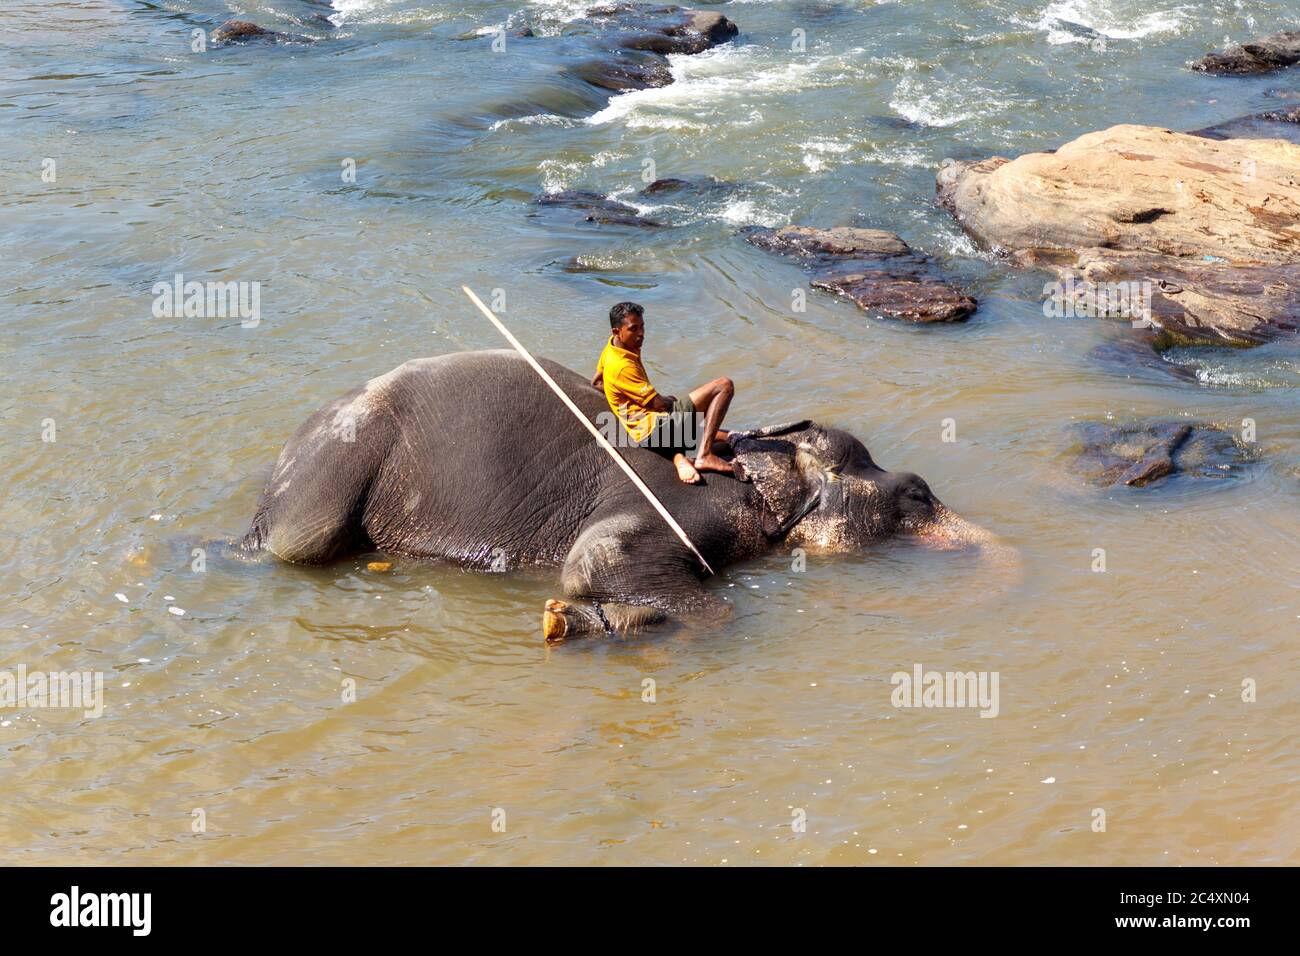 SRI LANKA - Circa 2014: Man taking a rest on an elephant that is laying on water to coll down from the extreme heat wave. Stock Photo